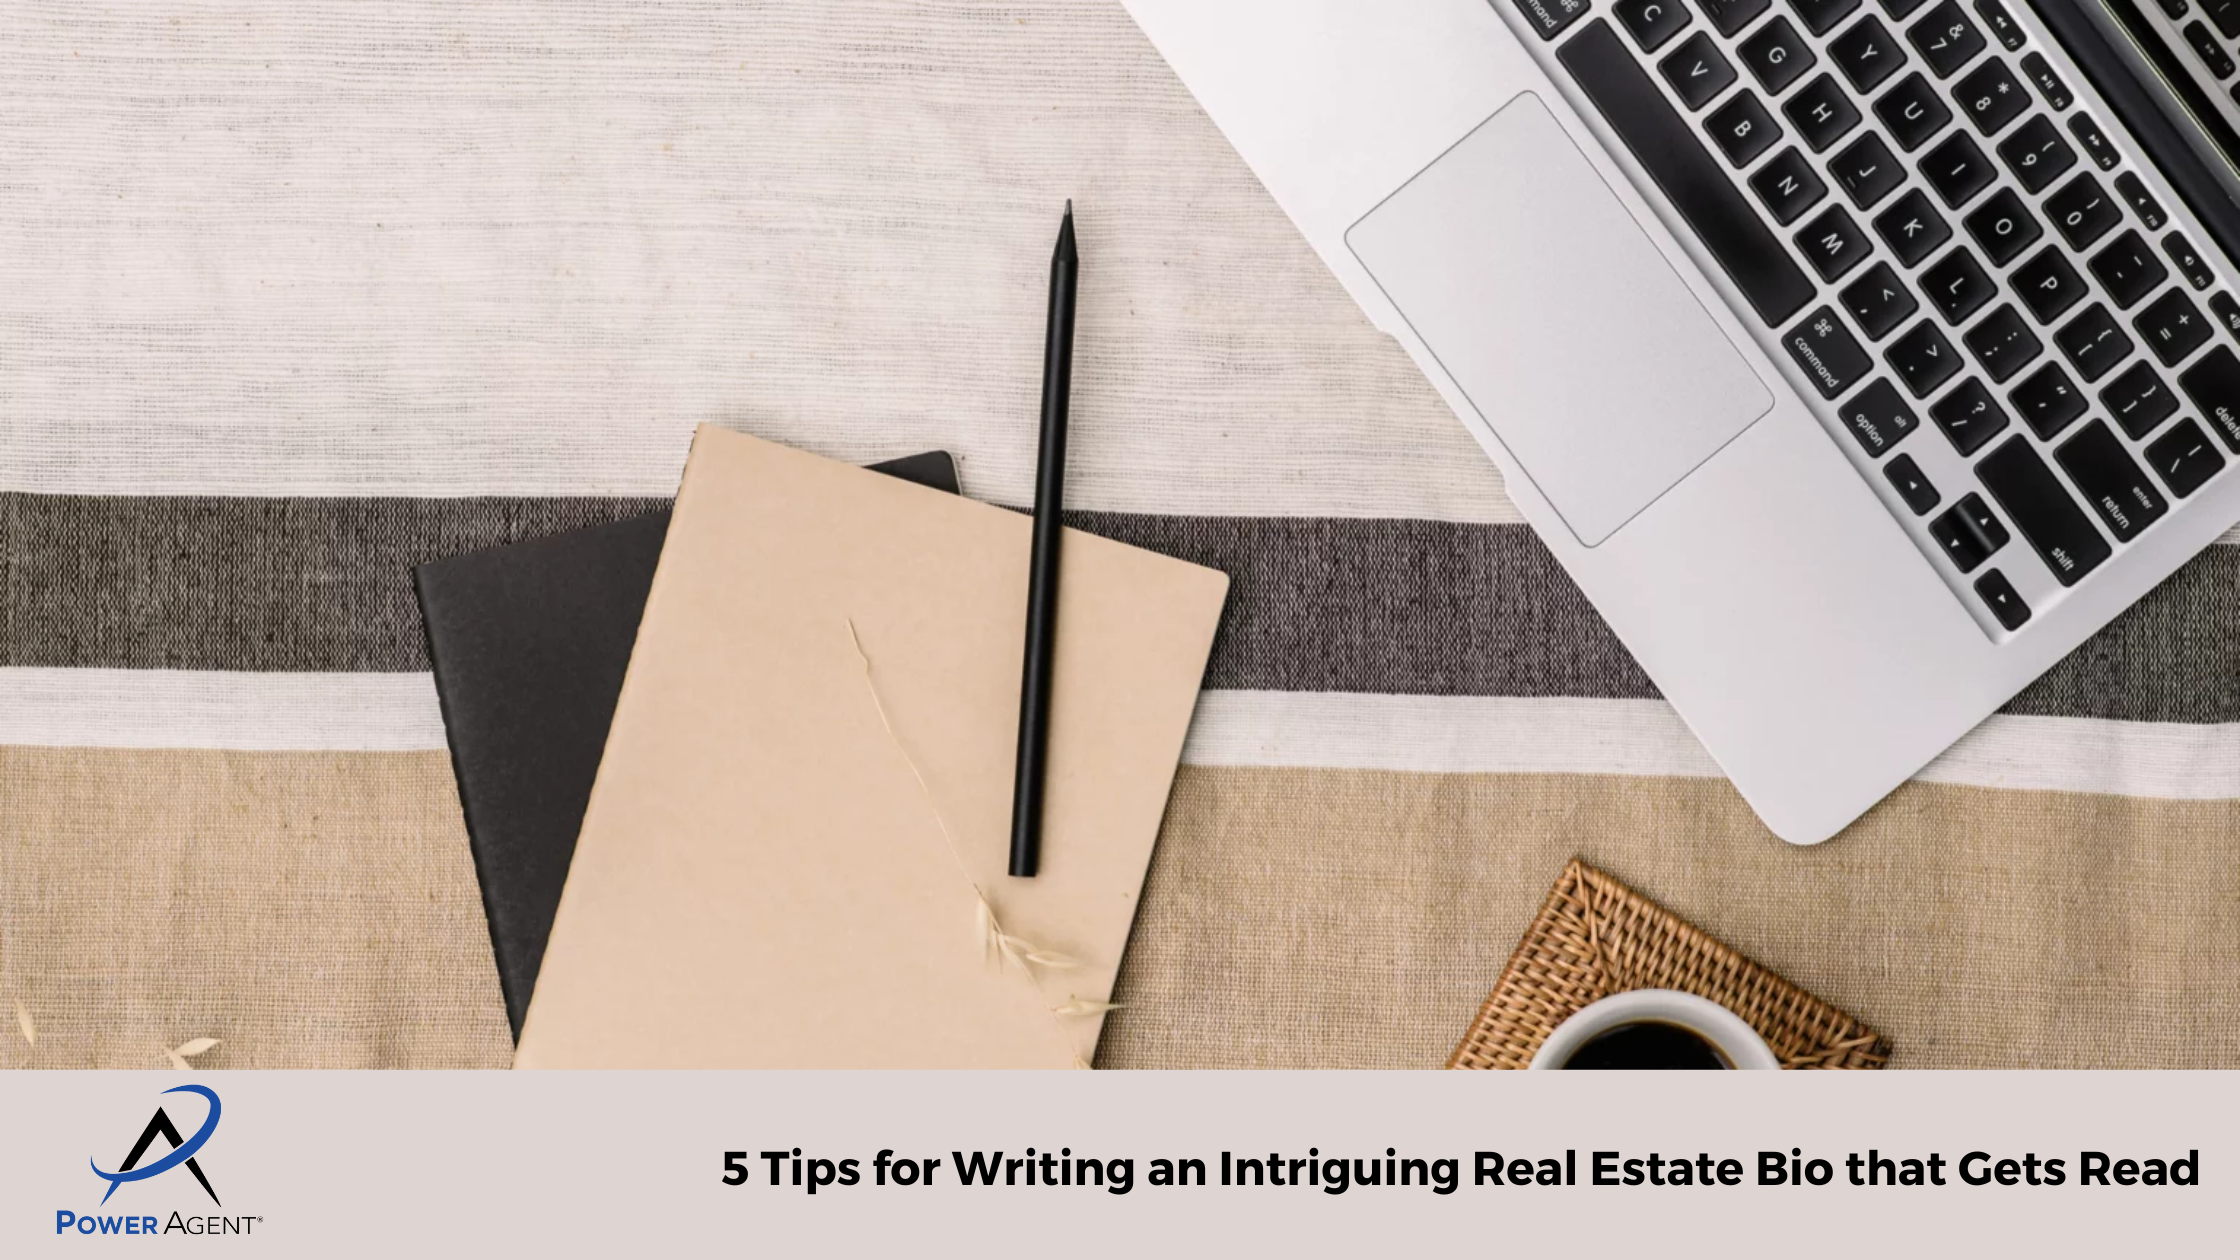 5 Tips for Writing an Intriguing Real Estate Bio that Gets Read